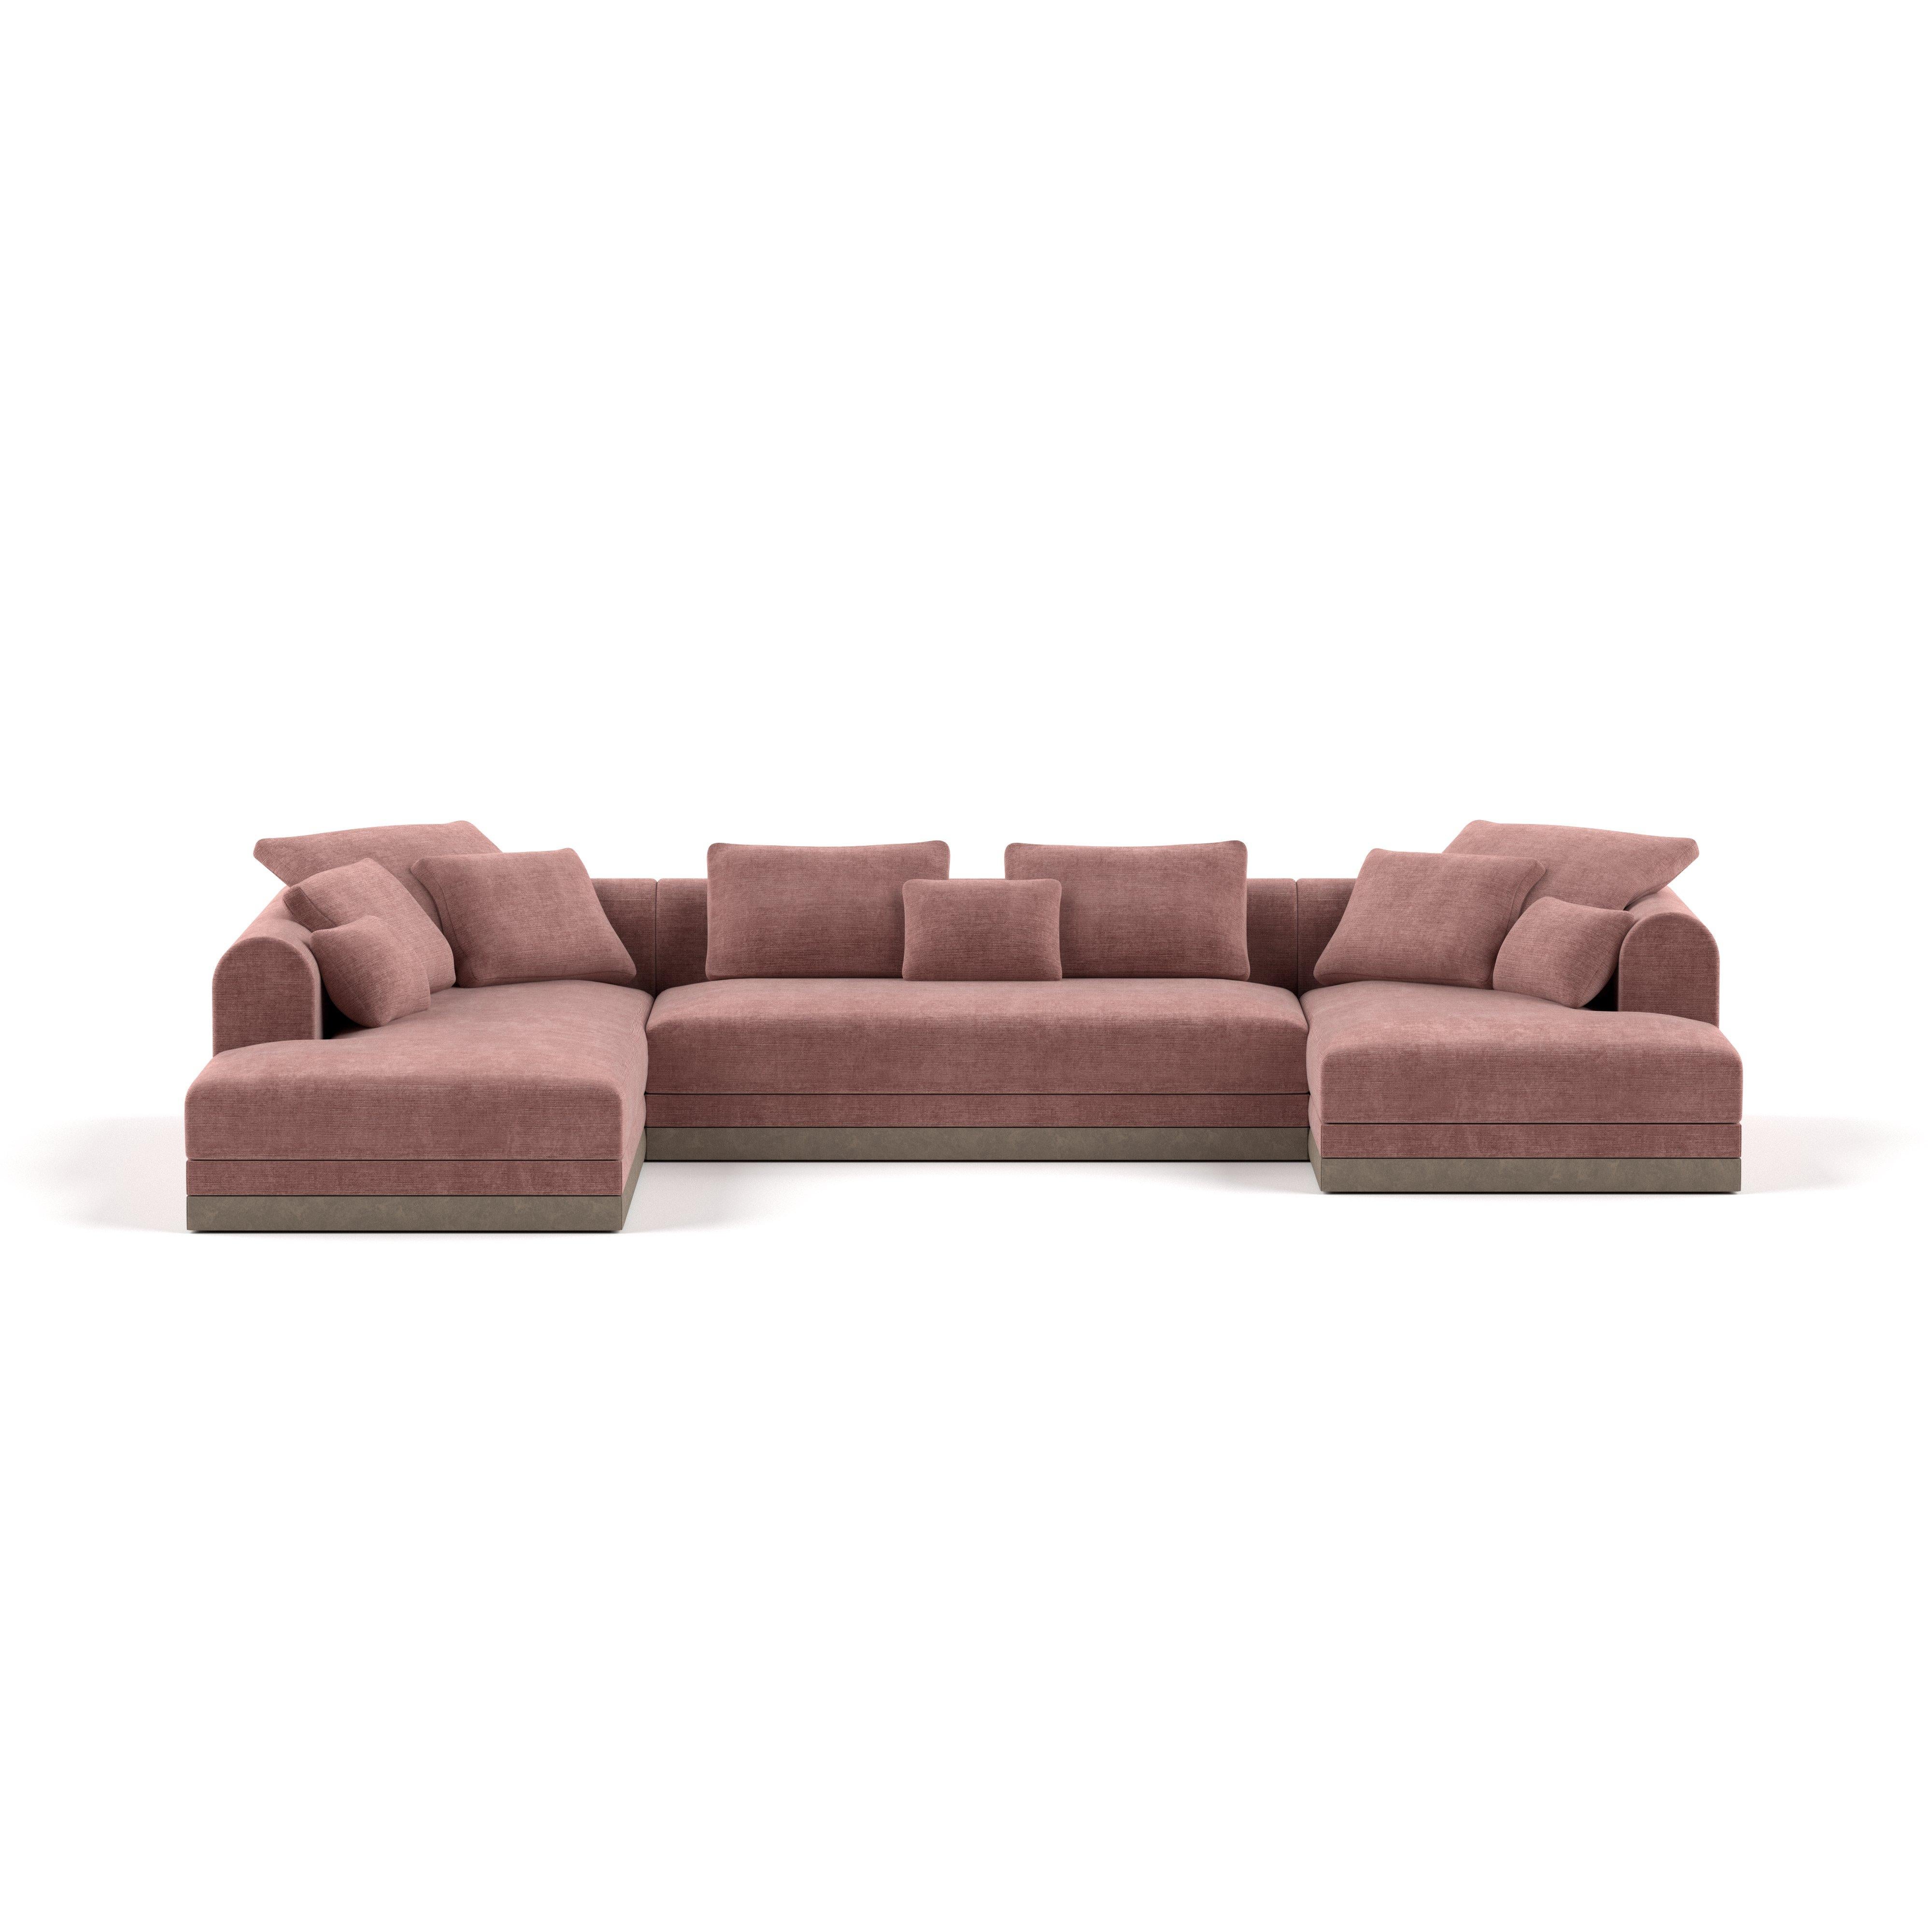 'Aqueduct' Contemporary Sofa by Poiat, Setup 4, Yang 95, Low Plinth For Sale 6